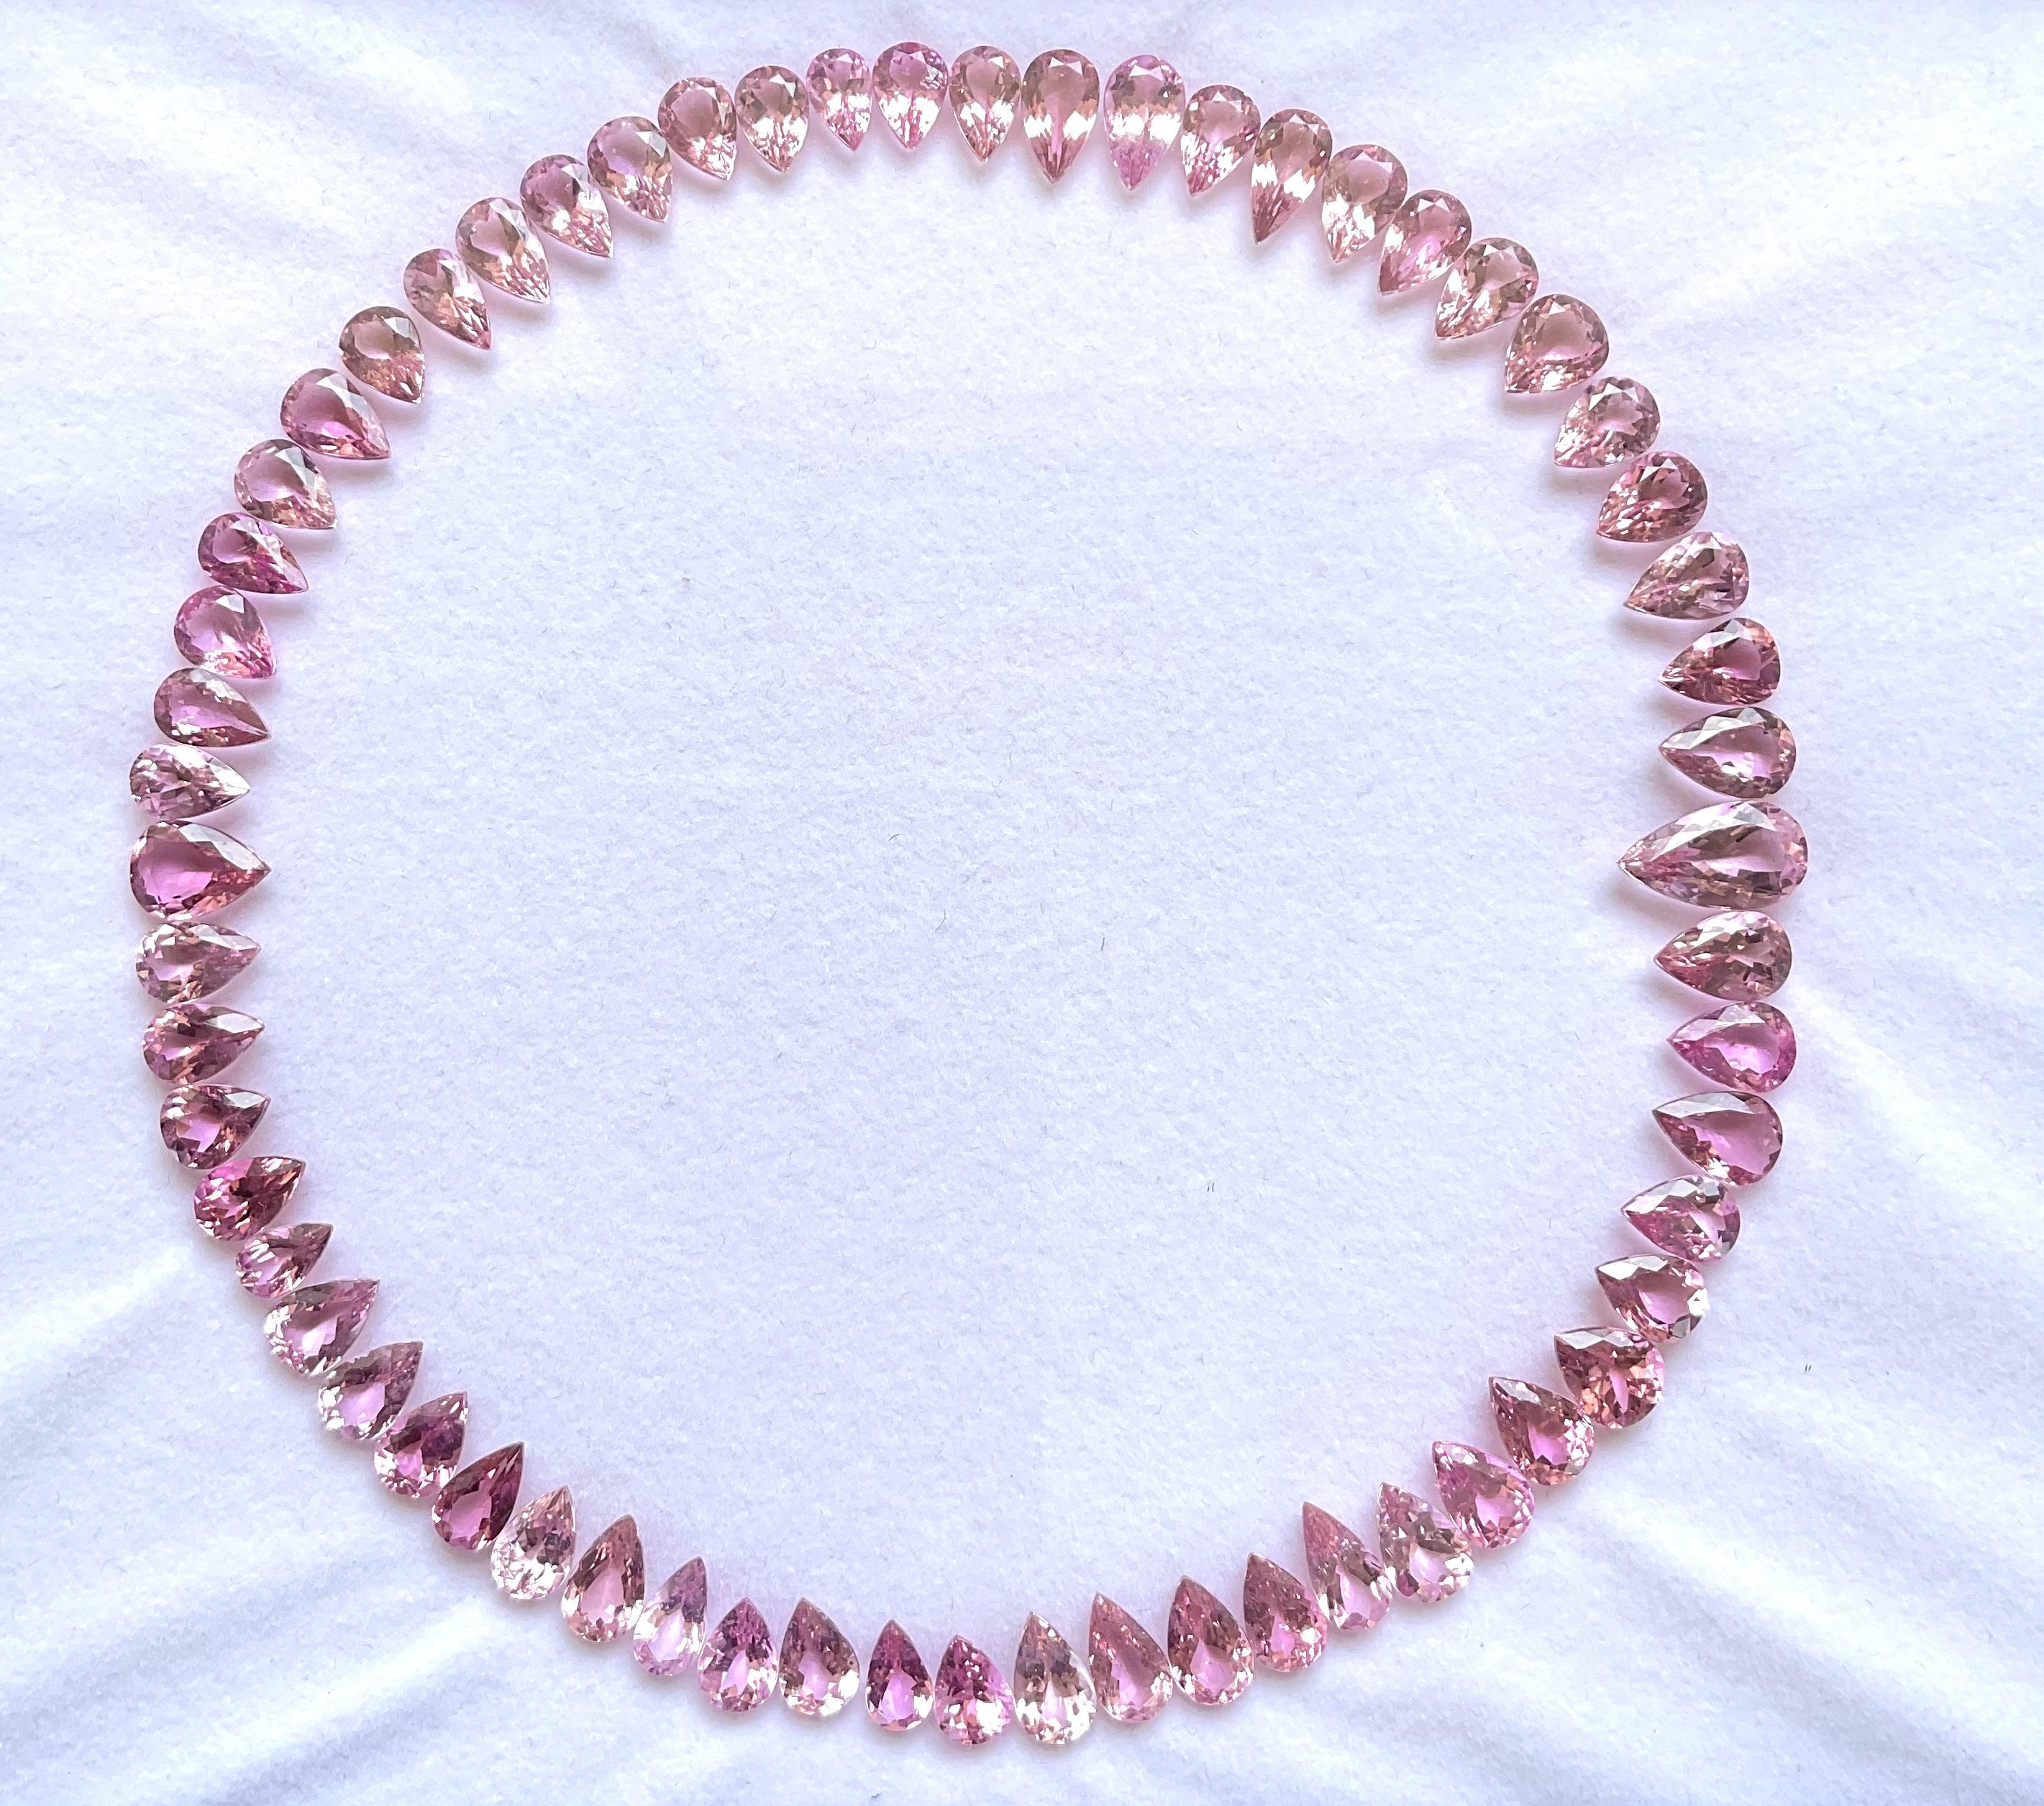 88.50 Carats pink tourmaline pear cut stone faceted top quality for jewelry gems
Gemstone - tourmaline
Weight -  88.50 Carats
Size - 14x8 to 7x5 MM
Quantity - 61 Pieces

